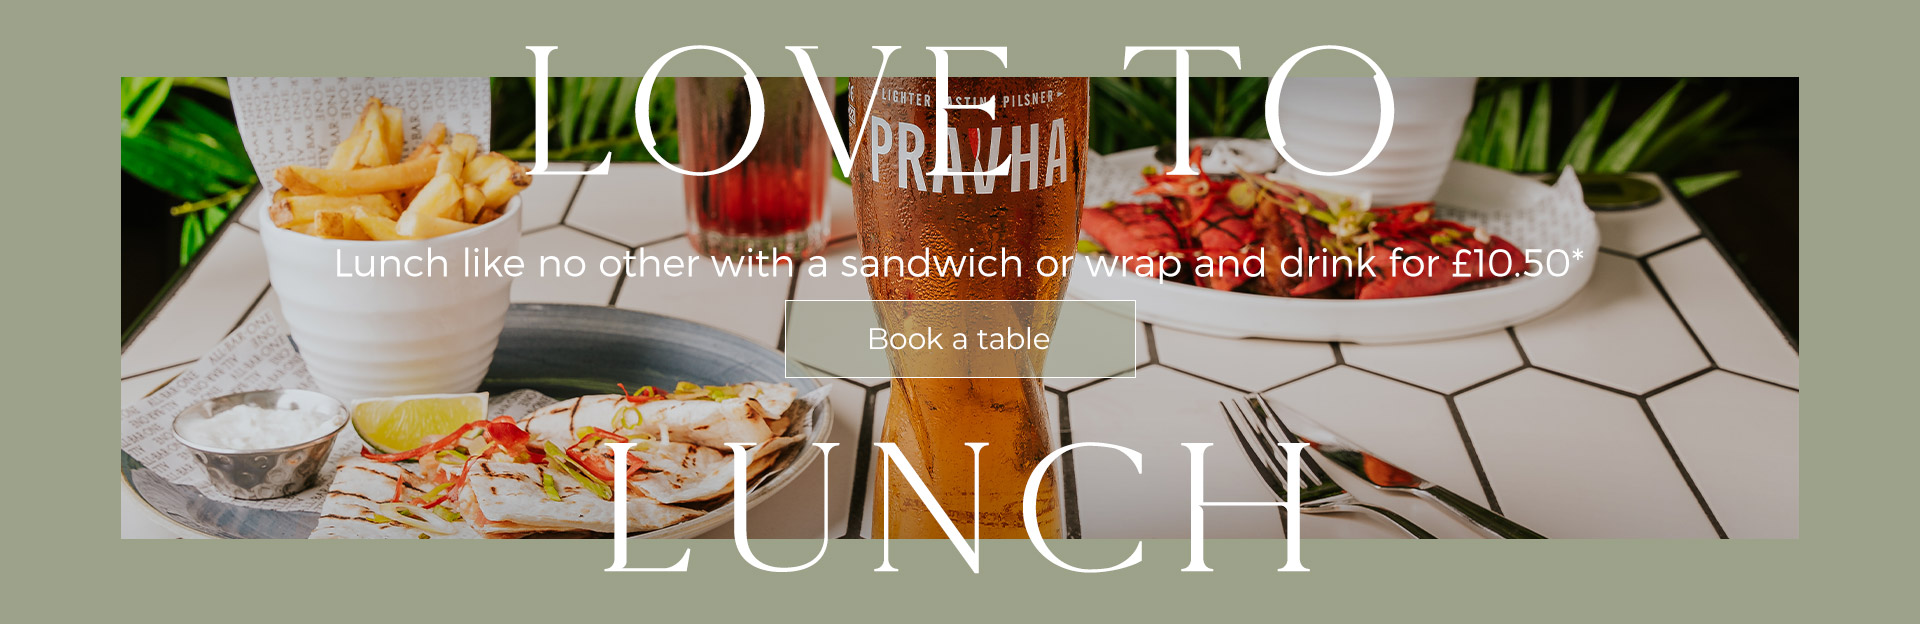 Lunch Offer at All Bar One Southampton